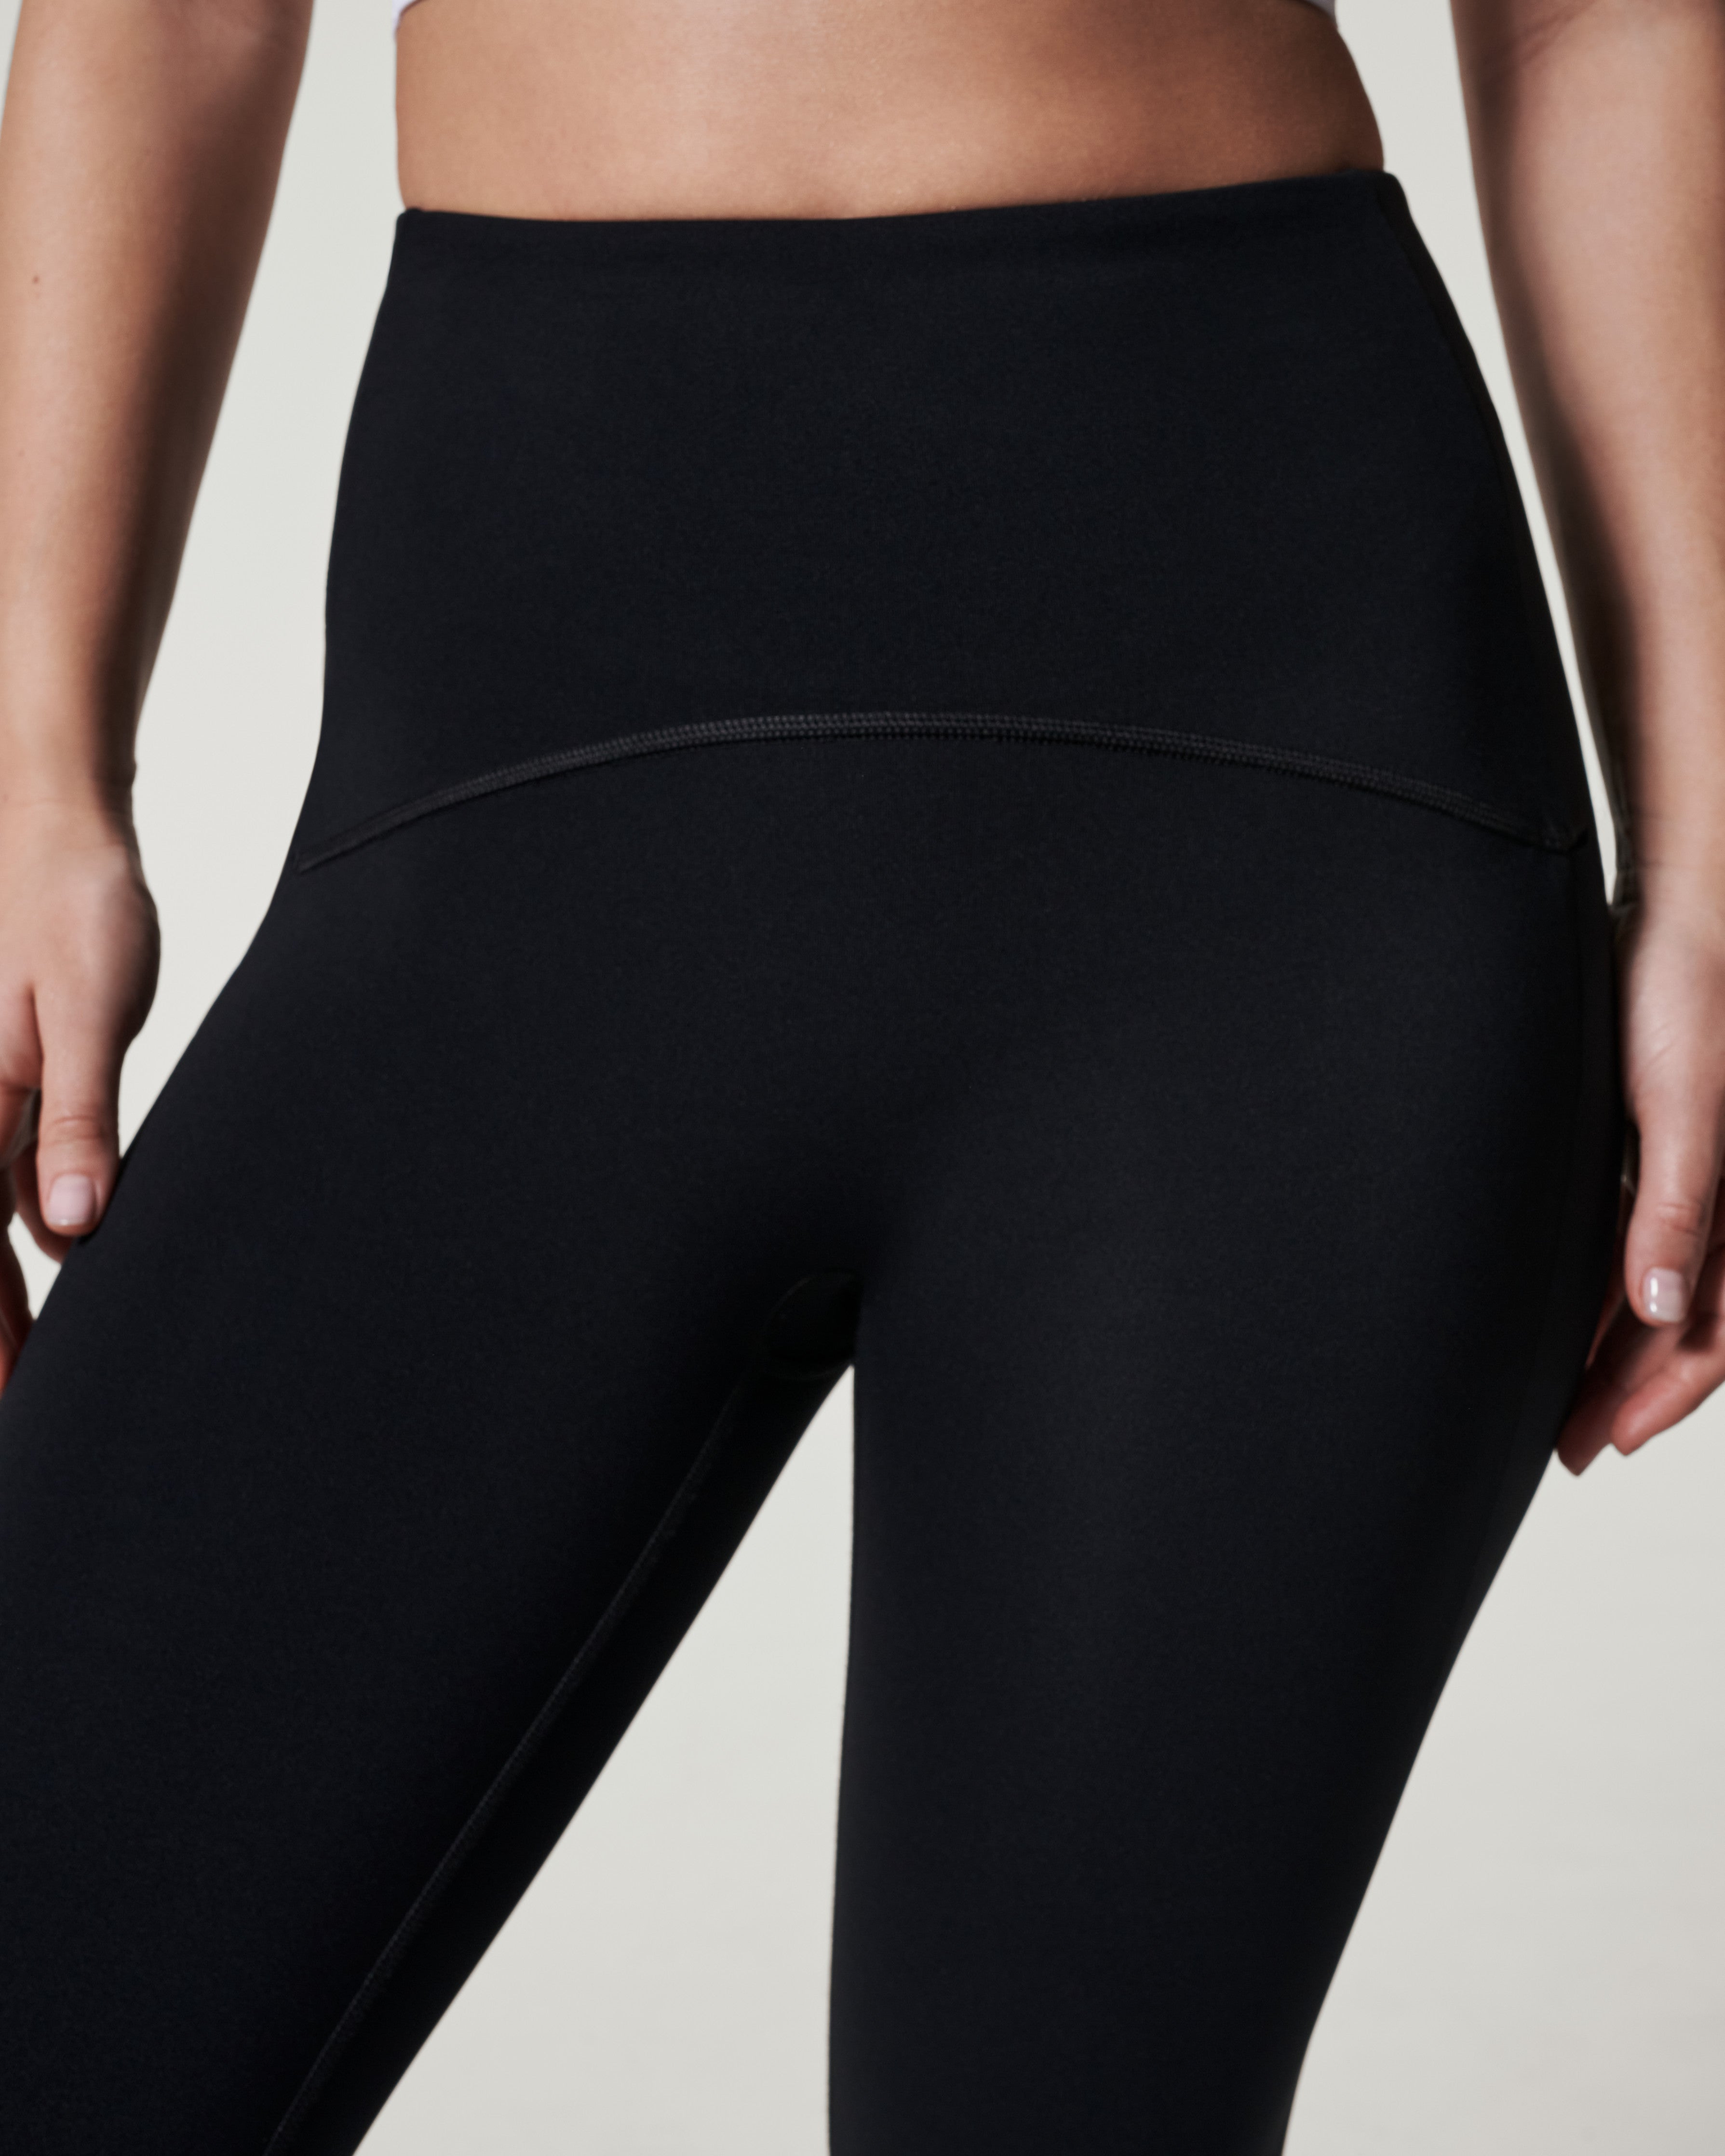 Modern MOM - ‼️DEAL OVER‼️70% off & ships free🙌 Spanx workout top is so  cute with high-waisted leggings or shorts! If you're looking to reduce  bulge this is for you! L1NK IN